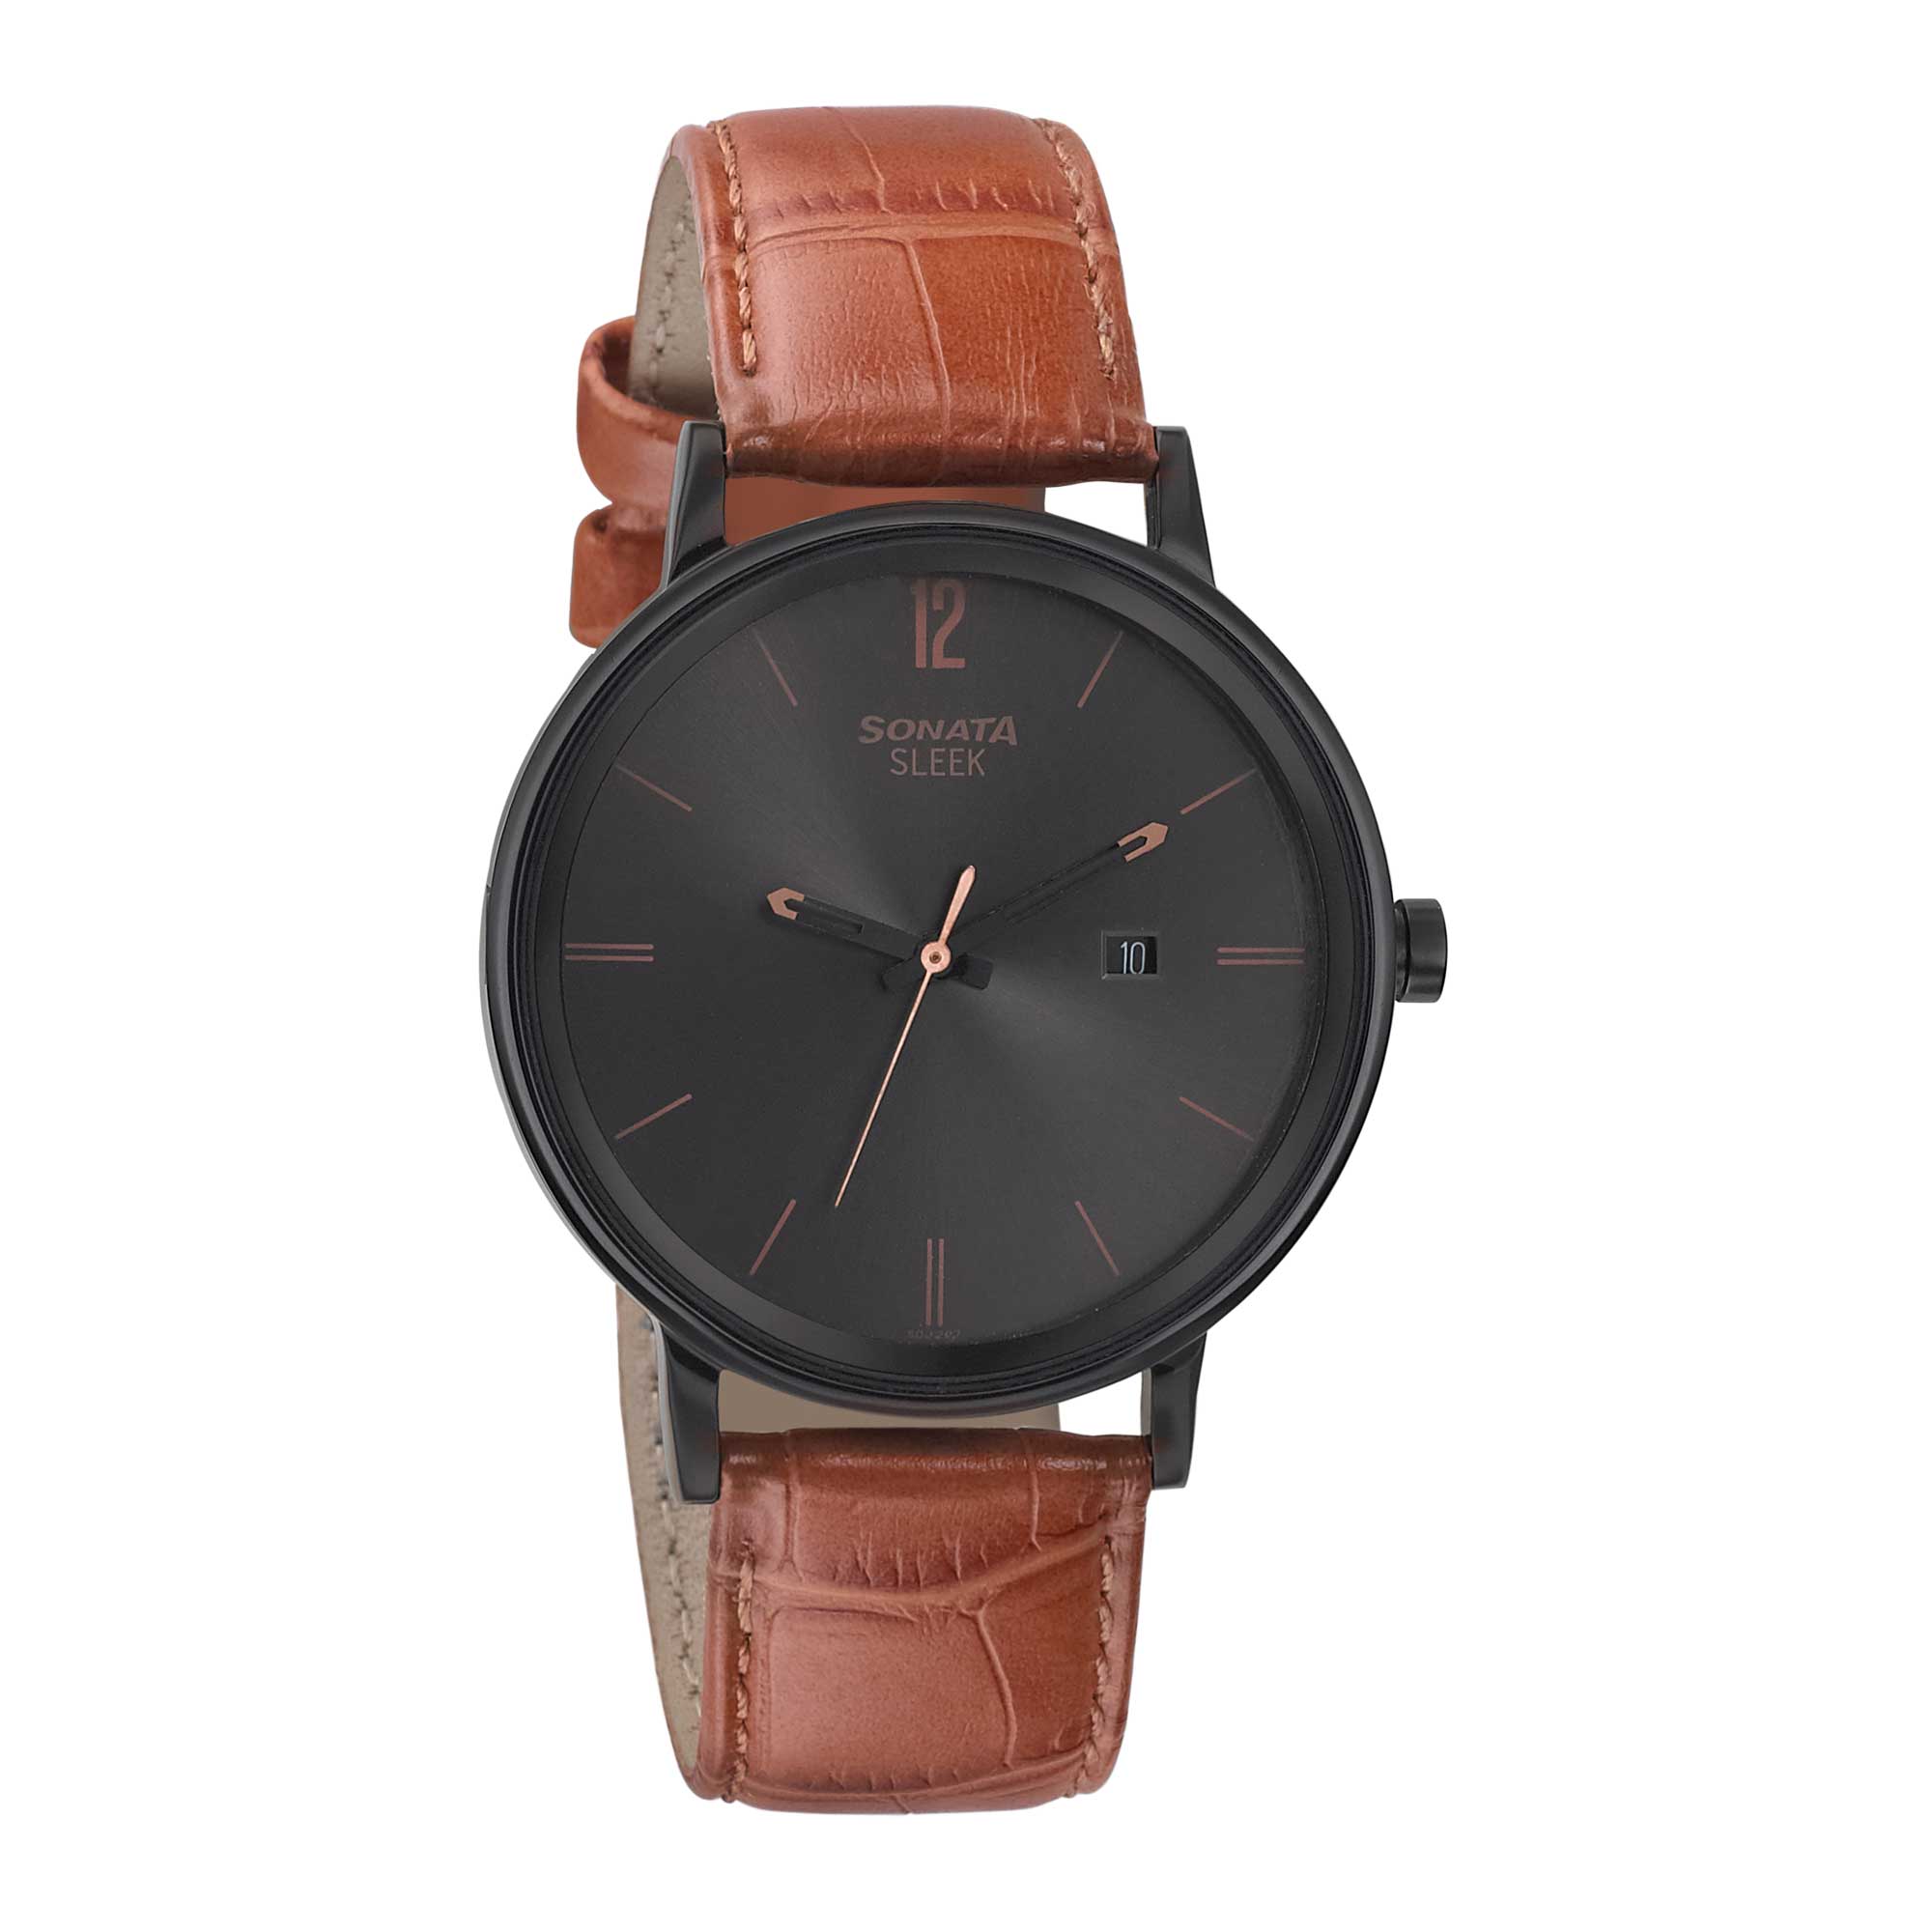 Sonata Quartz Analog with Date Black Dial Leather Strap Watch for Men